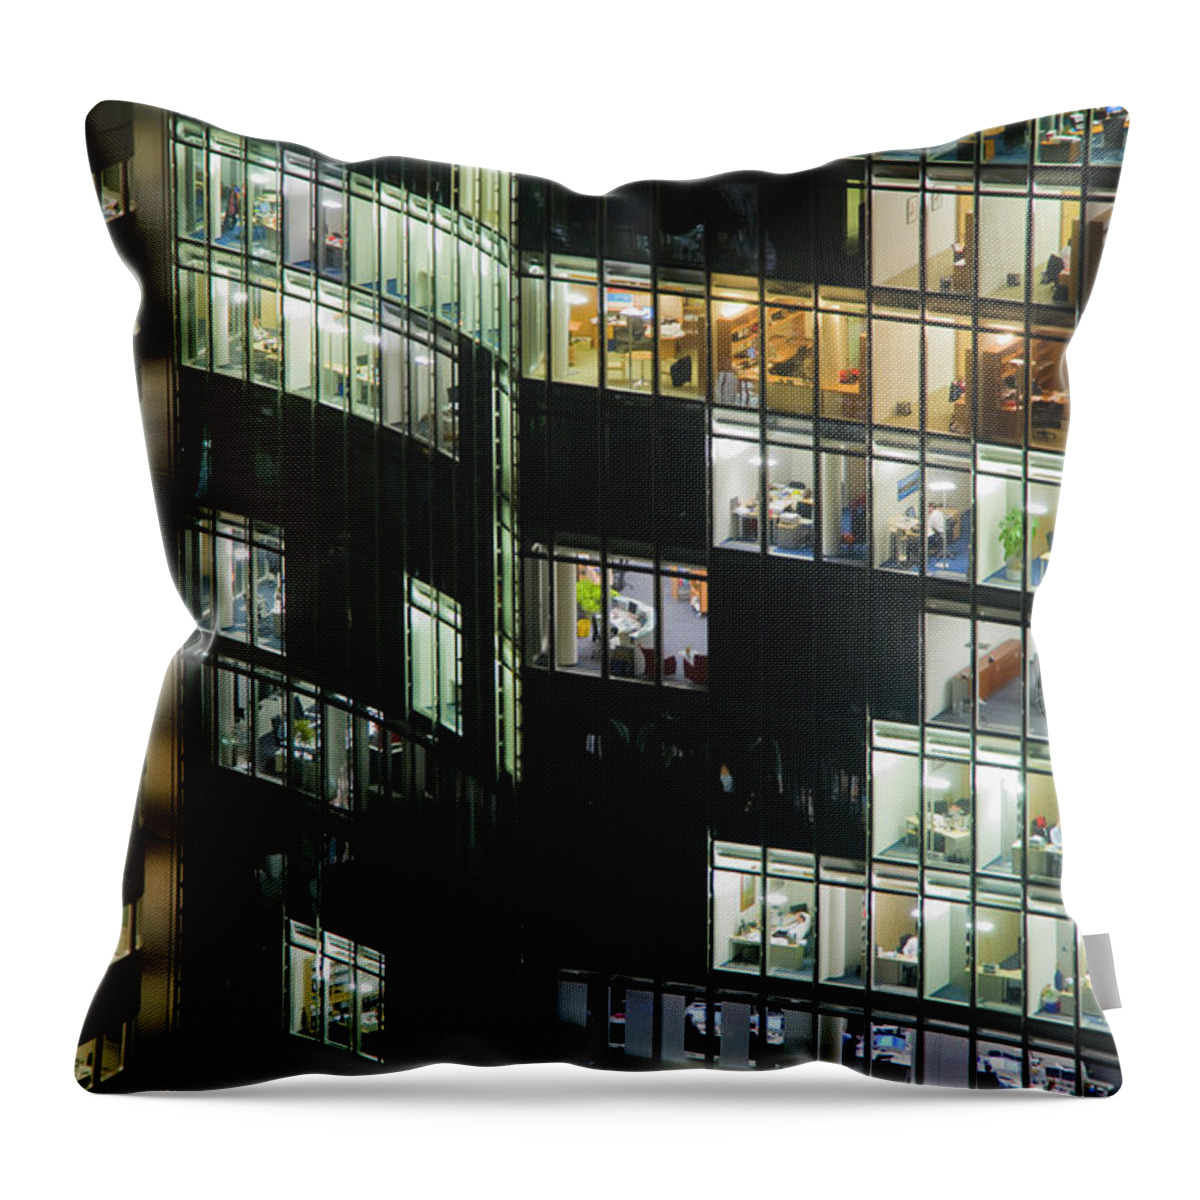 Corporate Business Throw Pillow featuring the photograph Offices In Office Buildings At Night by Werner Dieterich